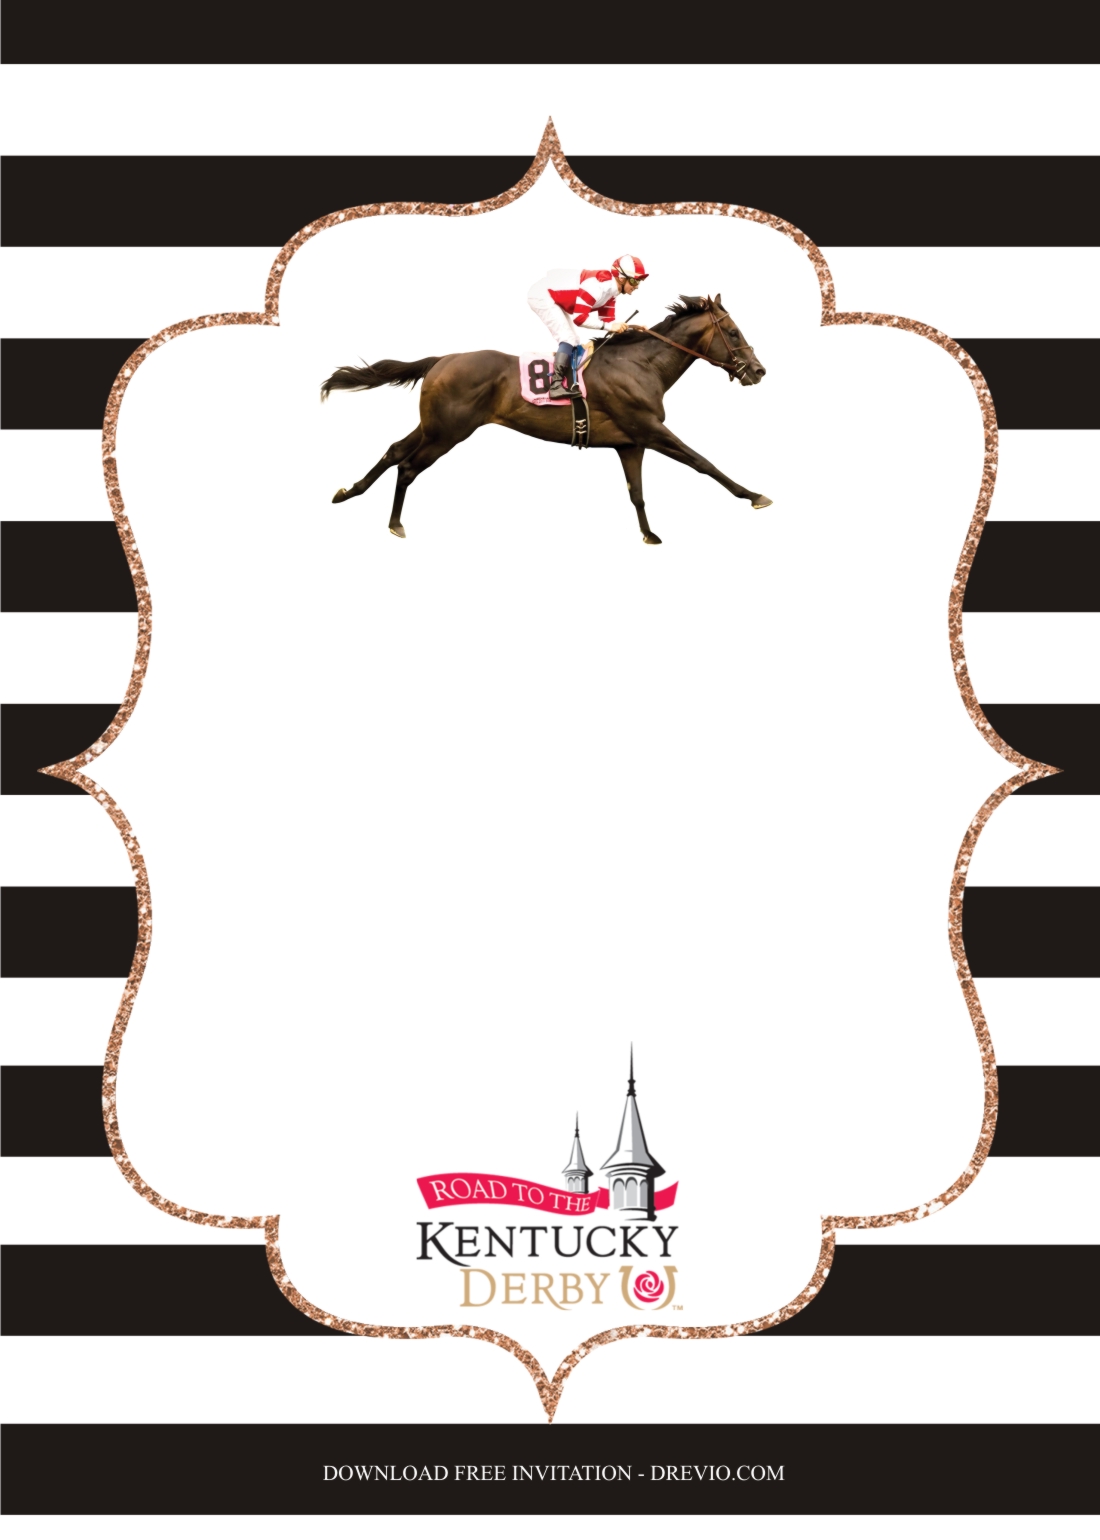 Kentucky derby invitation template6 Download Hundreds FREE PRINTABLE 